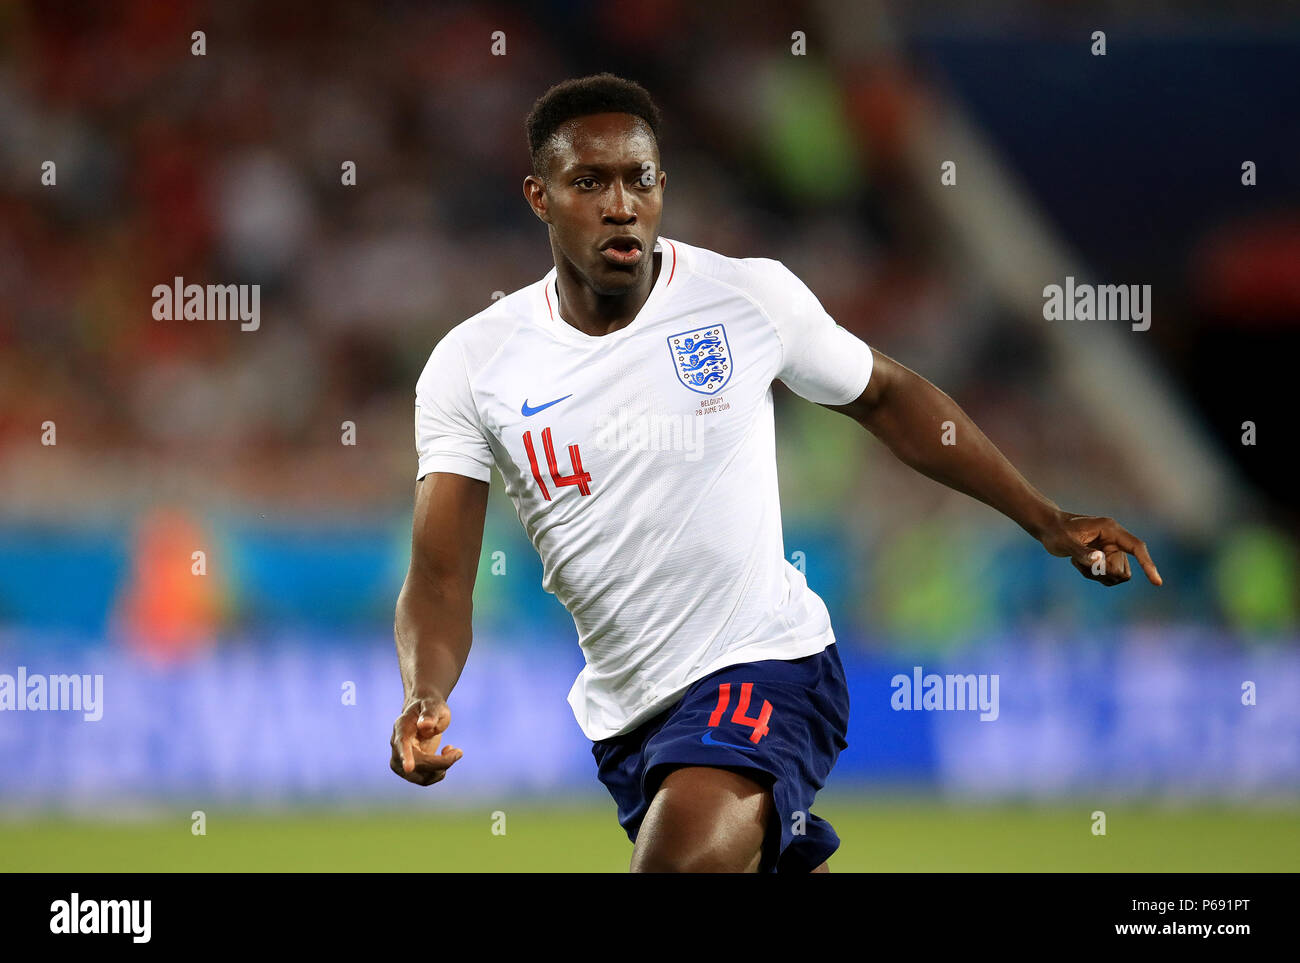 England's Danny Welbeck during the FIFA World Cup Group G match at Kaliningrad Stadium. PRESS ASSOCIATION Photo. Picture date: Thursday June 28, 2018. See PA story WORLDCUP England. Photo credit should read: Adam Davy/PA Wire. RESTRICTIONS: Editorial use only. No commercial use. No use with any unofficial 3rd party logos. No manipulation of images. No video emulation Stock Photo